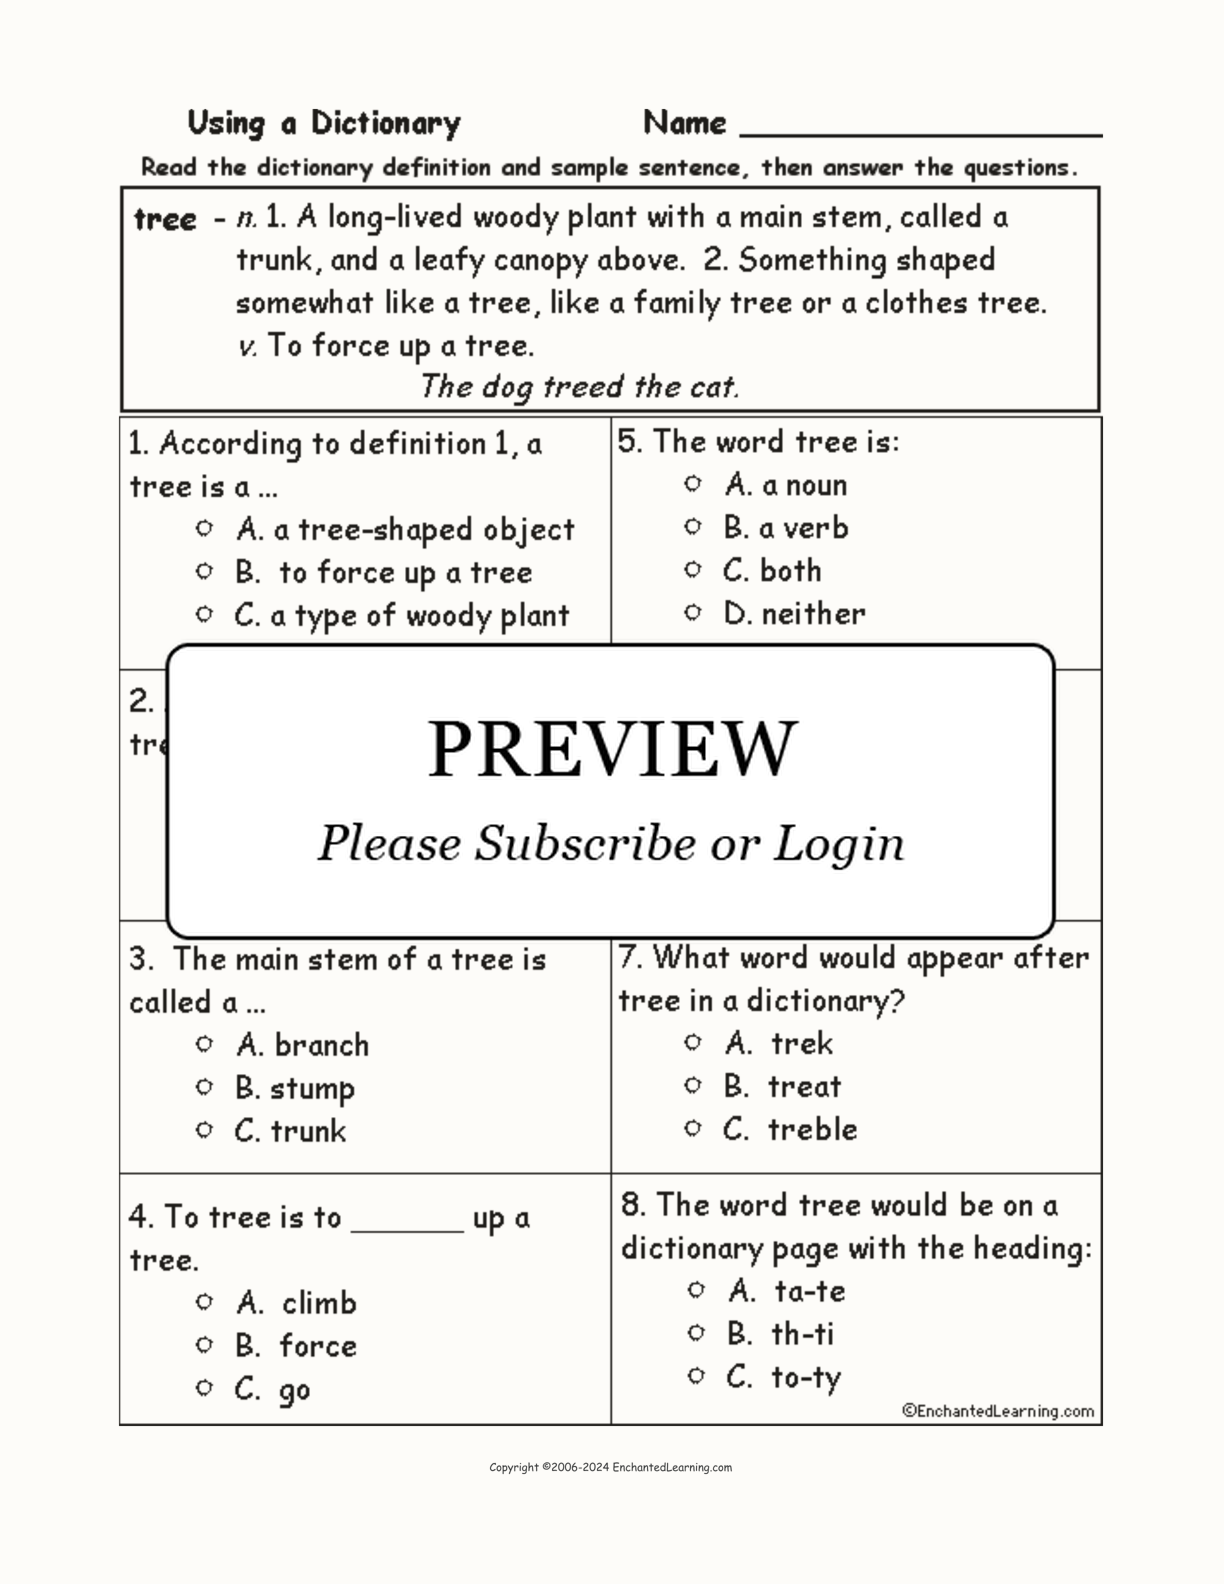 Tree Definition Quiz - Multiple Choice interactive worksheet page 1